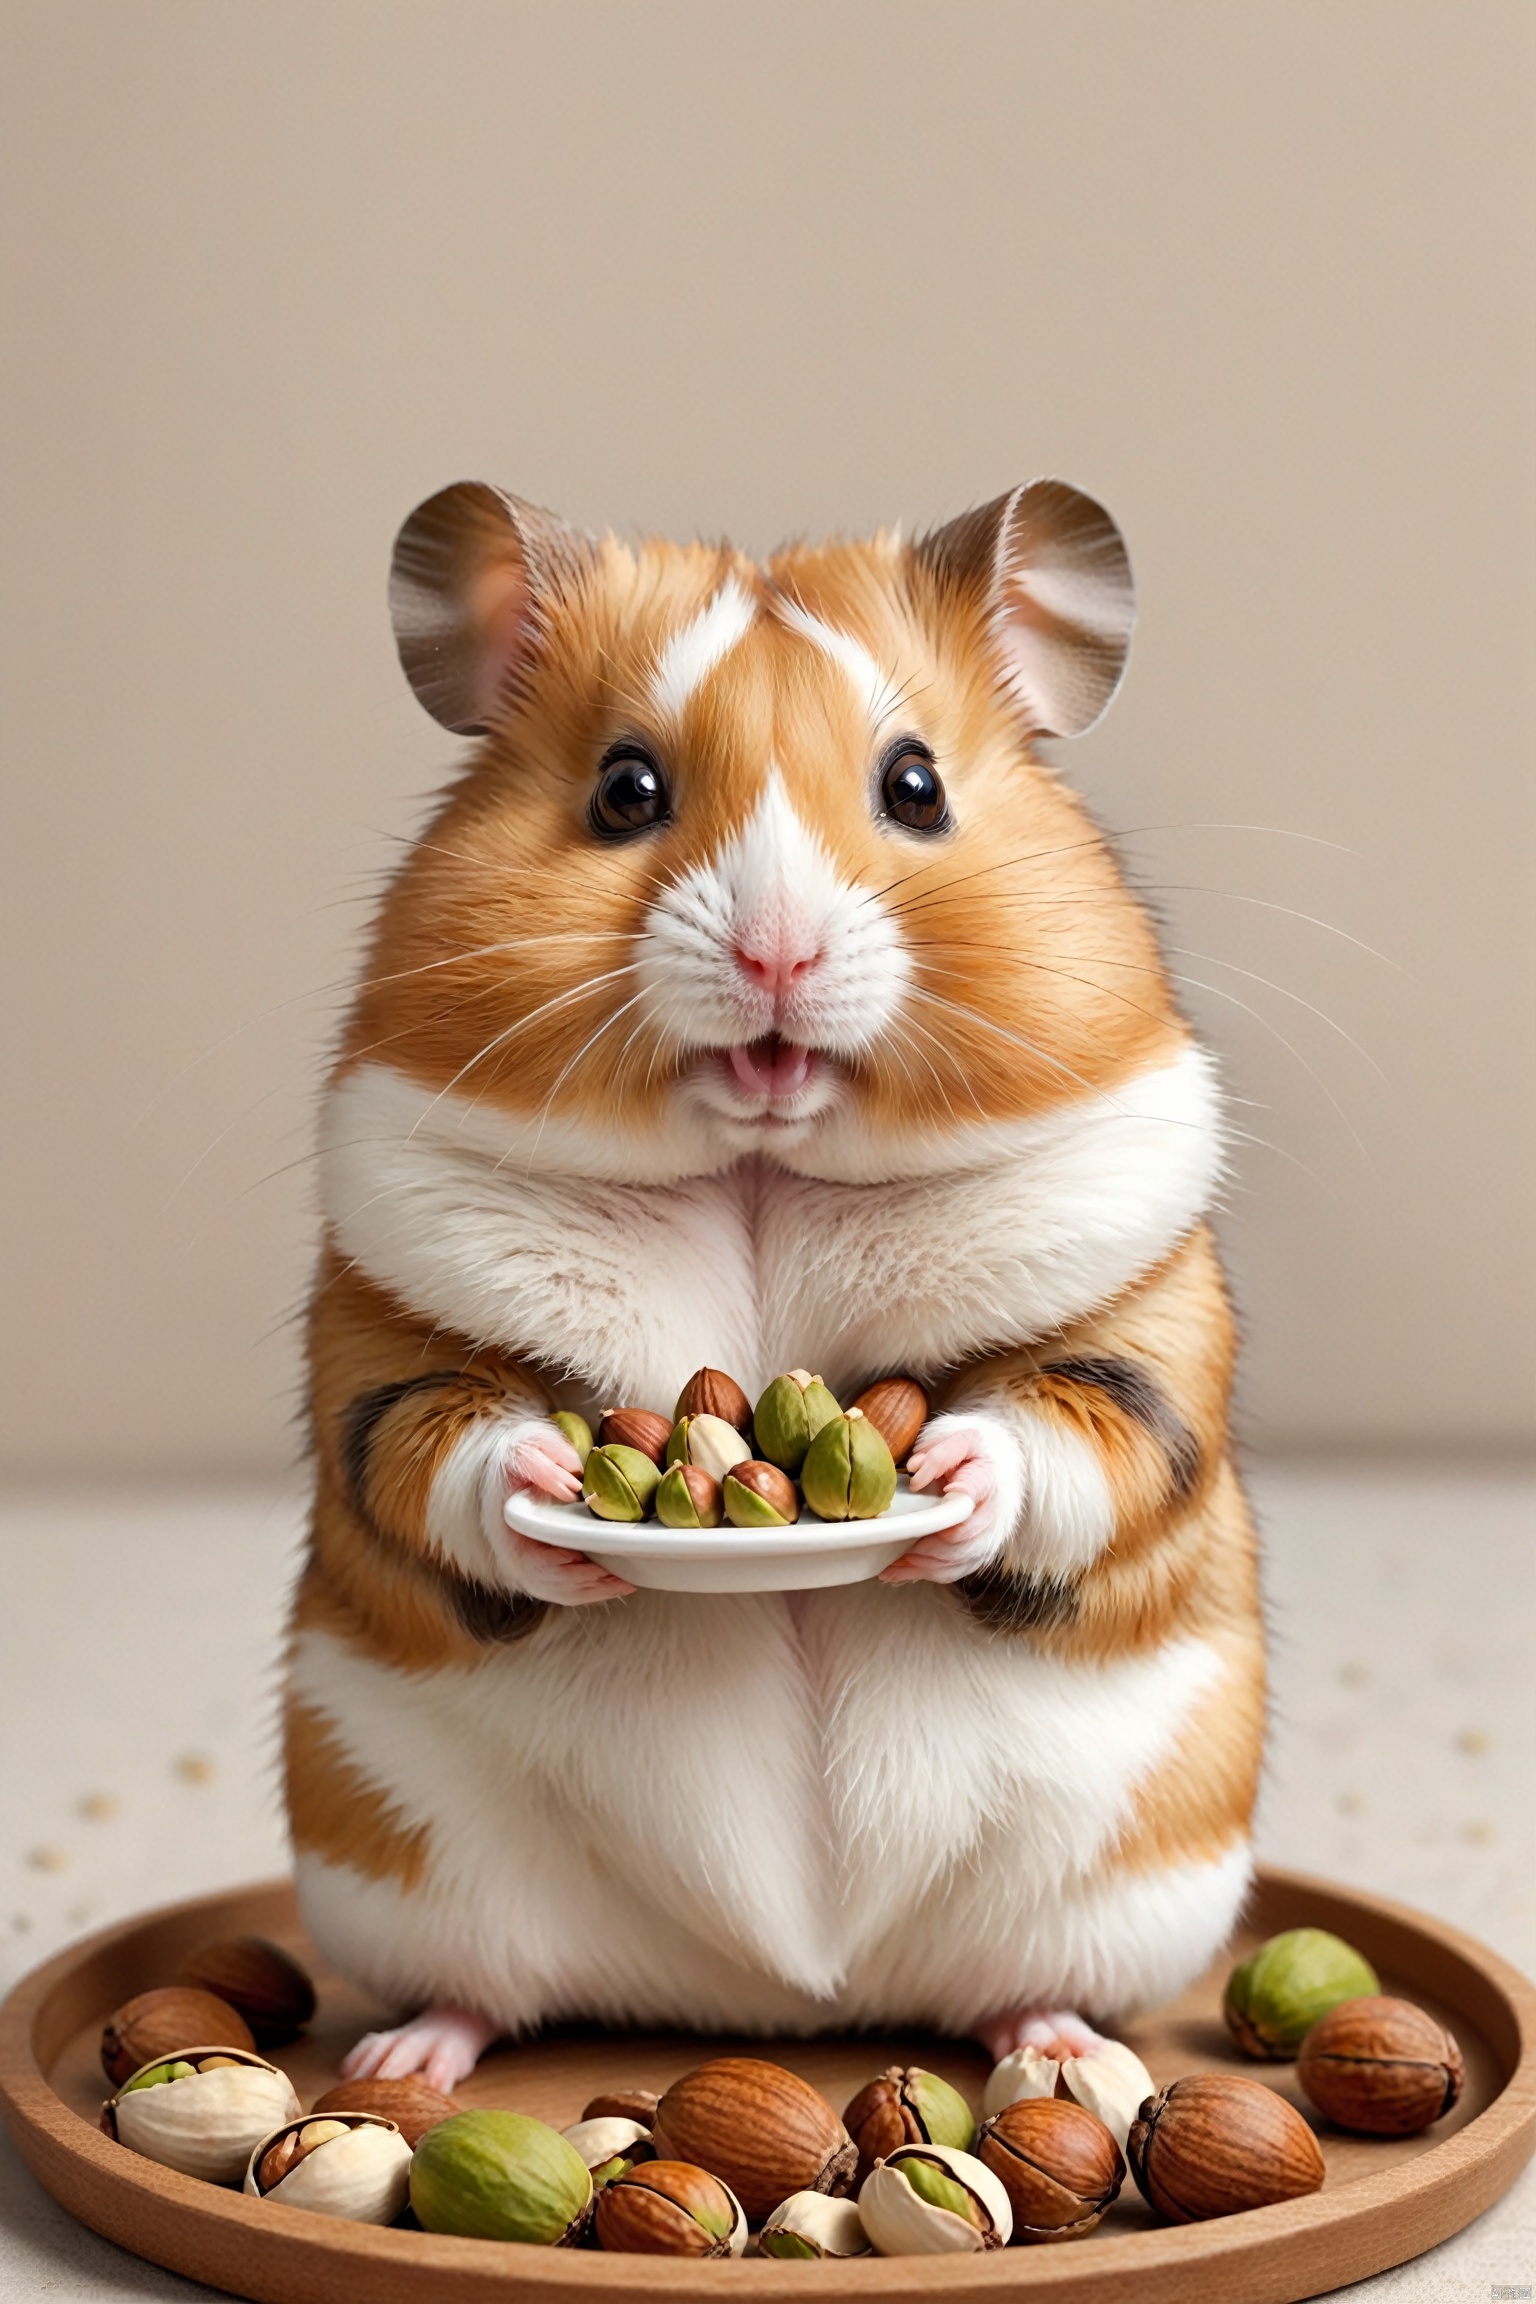 Cute animal, a hamster with white and brown patterns, facing the camera, holding a tray filled with various nuts and pistachios, cute style, realistic,